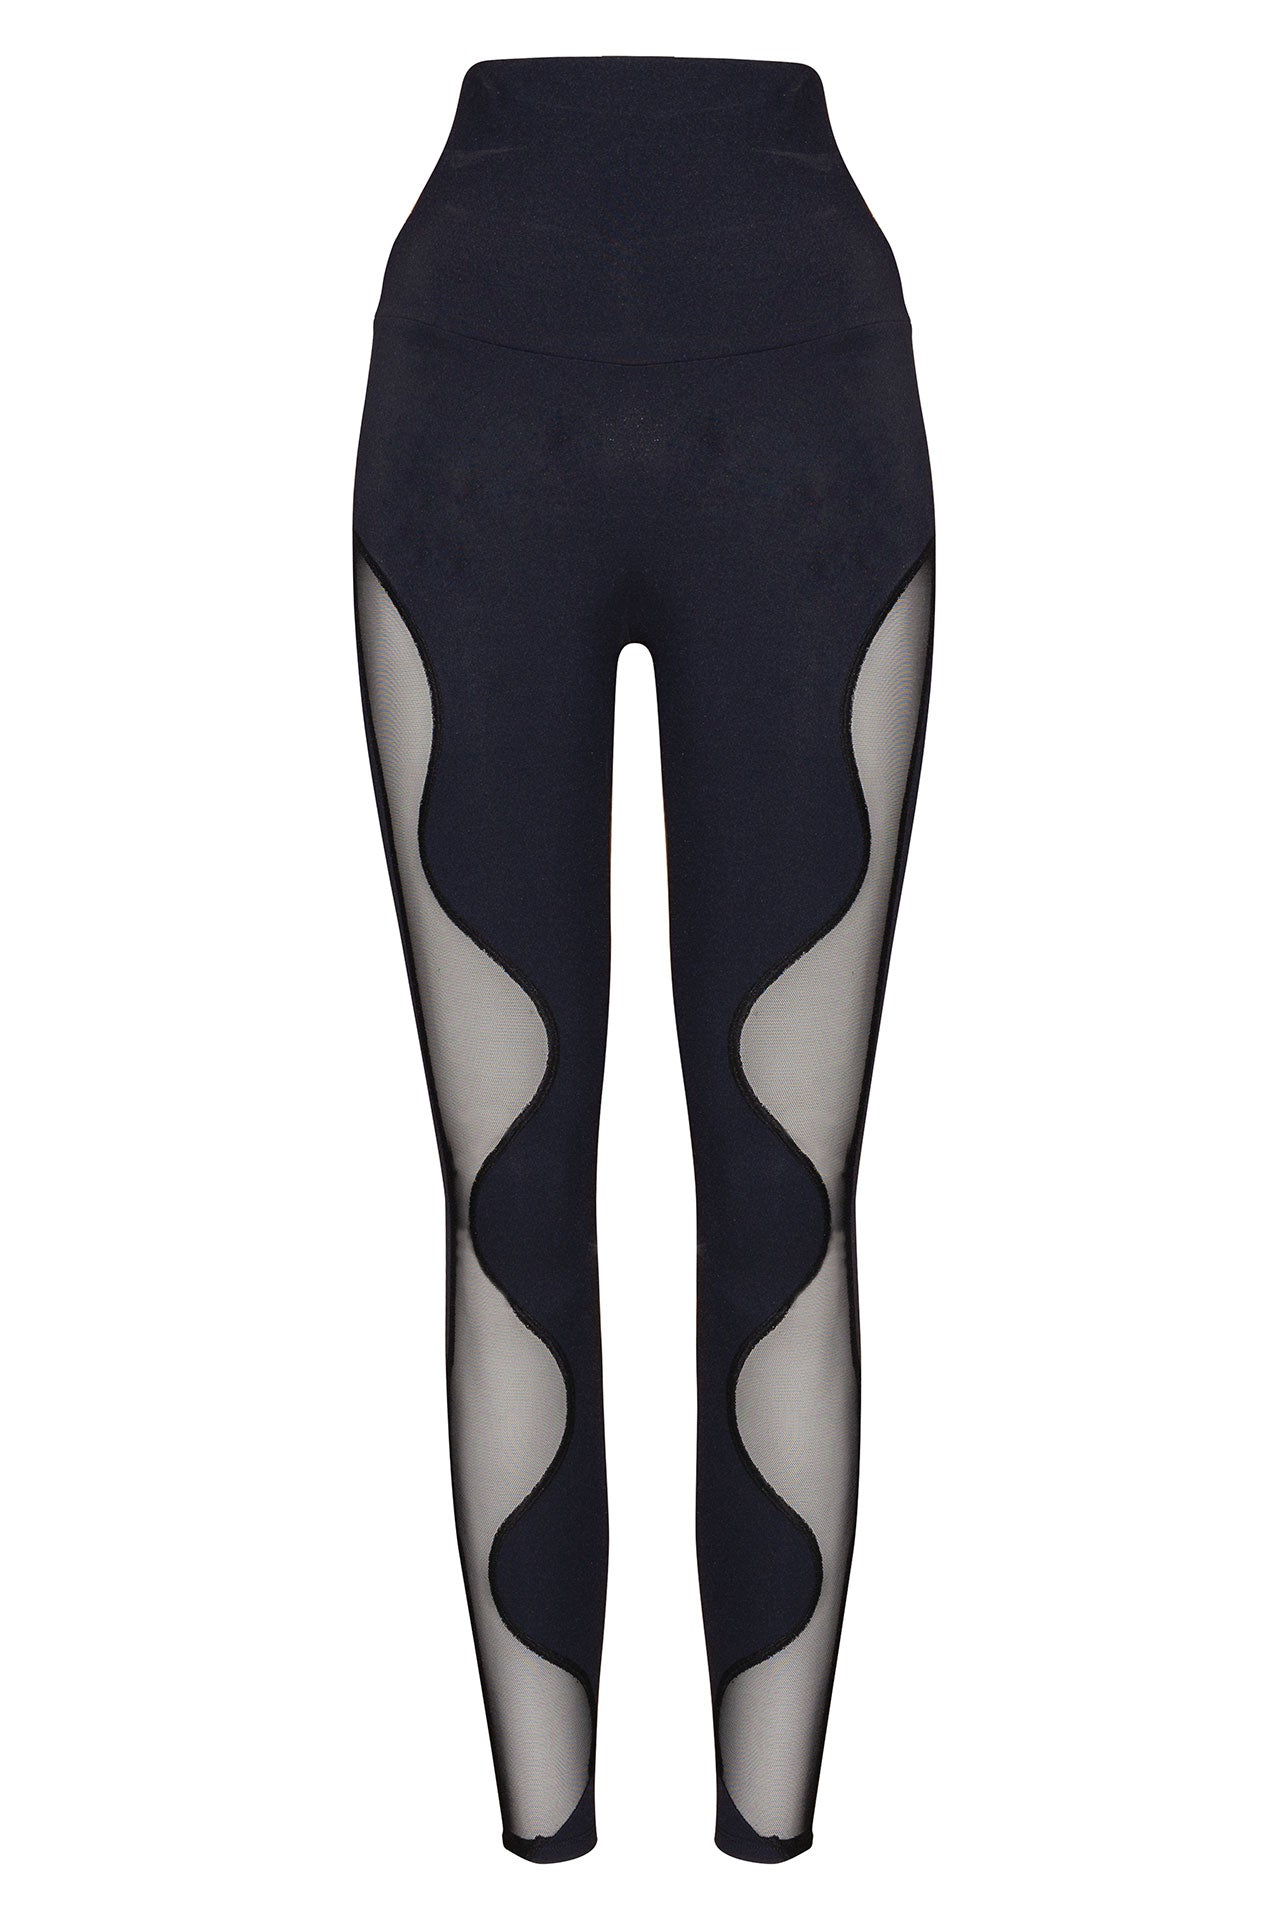 Nike Womens Pro Cool Training Tights Black/White 725477-010 Size Large :  Amazon.in: Clothing & Accessories